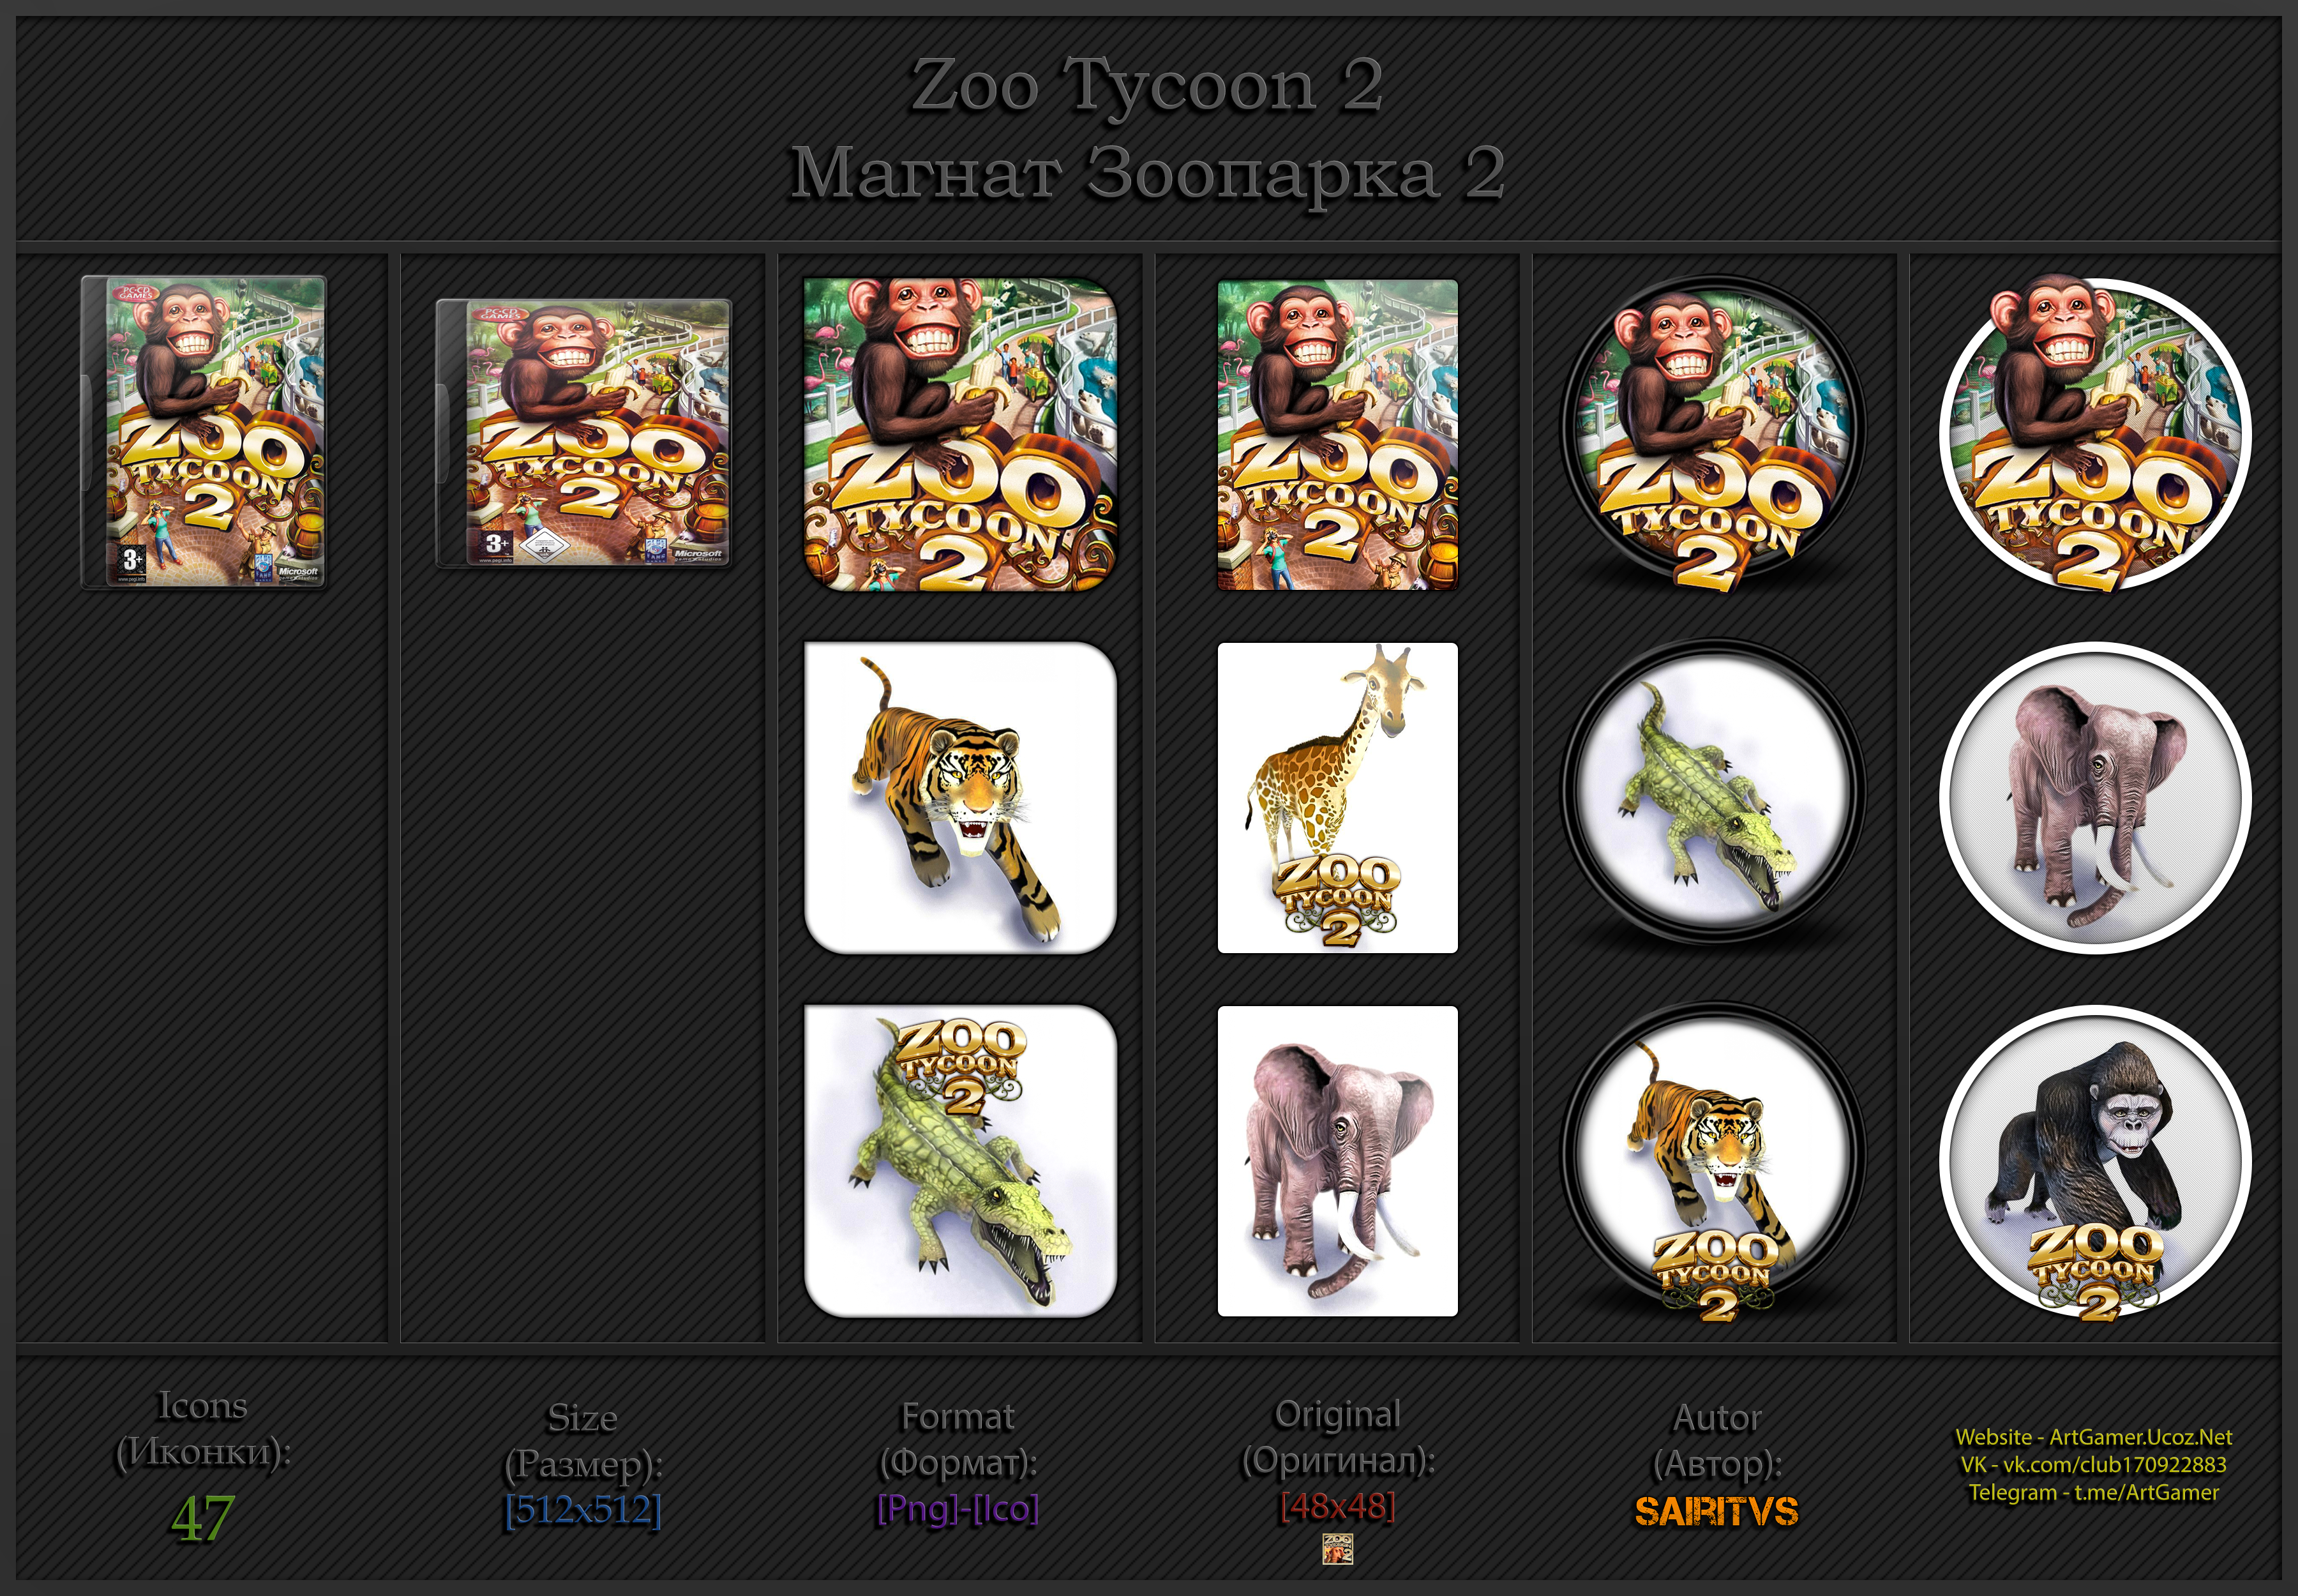 Missing Tanks and Icons Fix! : r/ZooTycoon